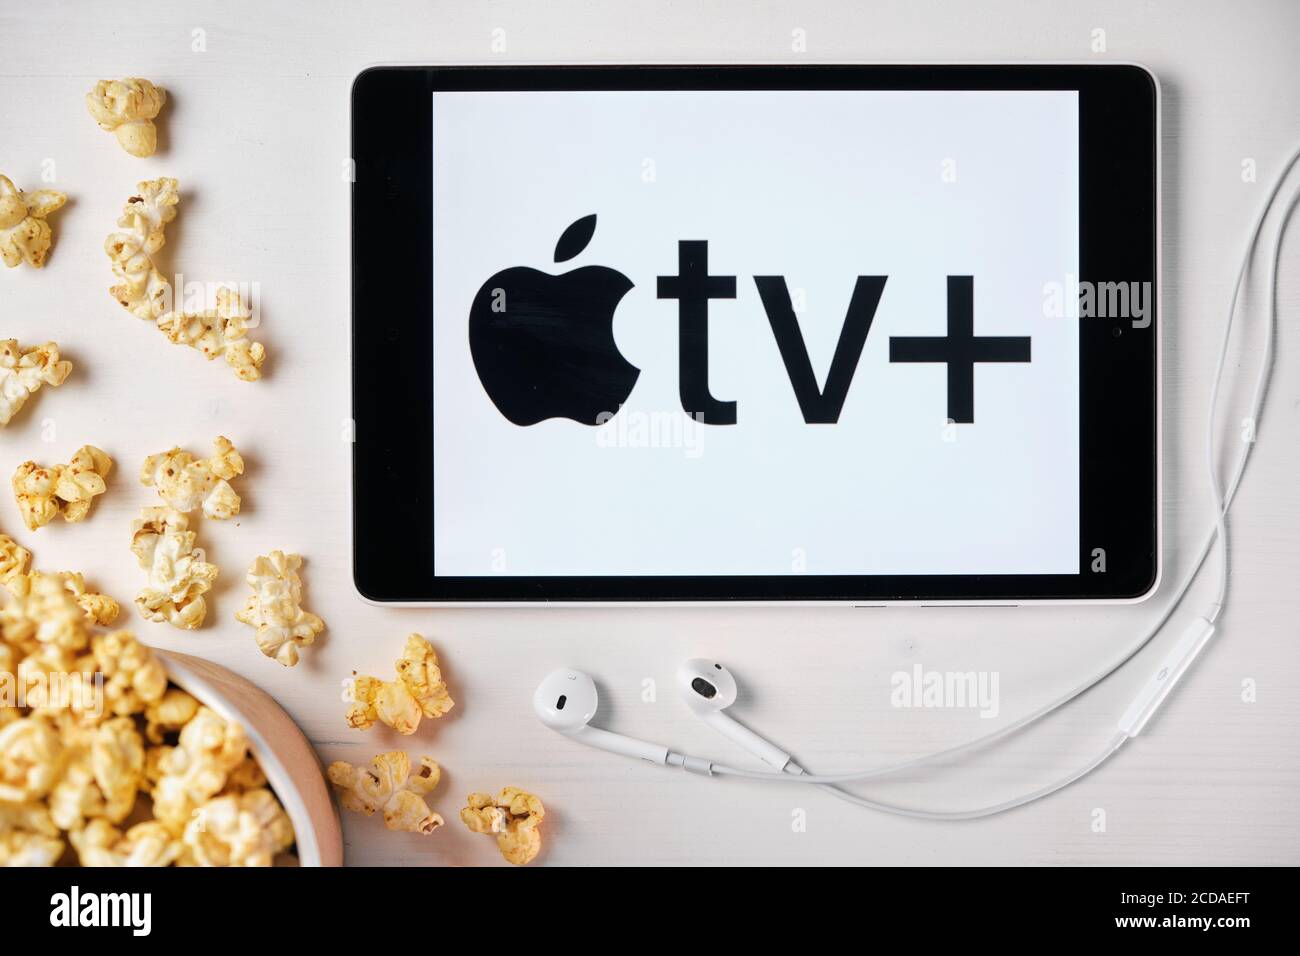 Apple tv plus logo on the screen of the tablet laying on the white table  and sprinkled popcorn on it. Apple earphones near the tablet showing a Apple  Stock Photo - Alamy